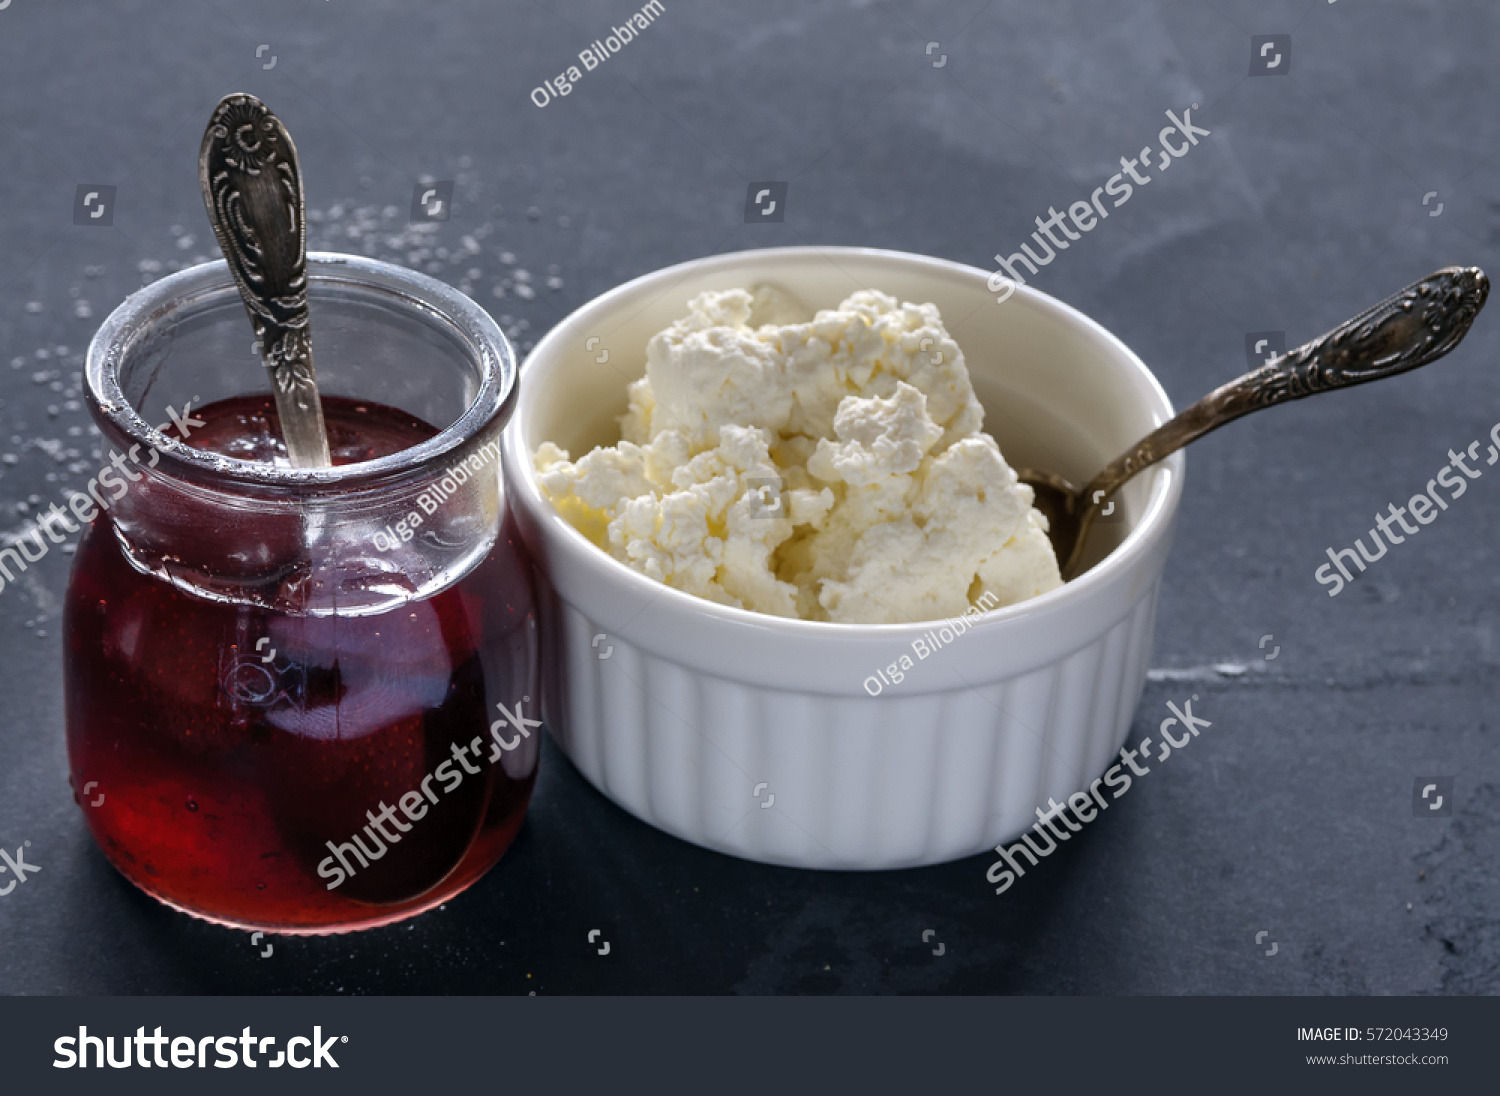 Healthy Breakfast Cottage Cheese Plate Jam Stock Photo Edit Now